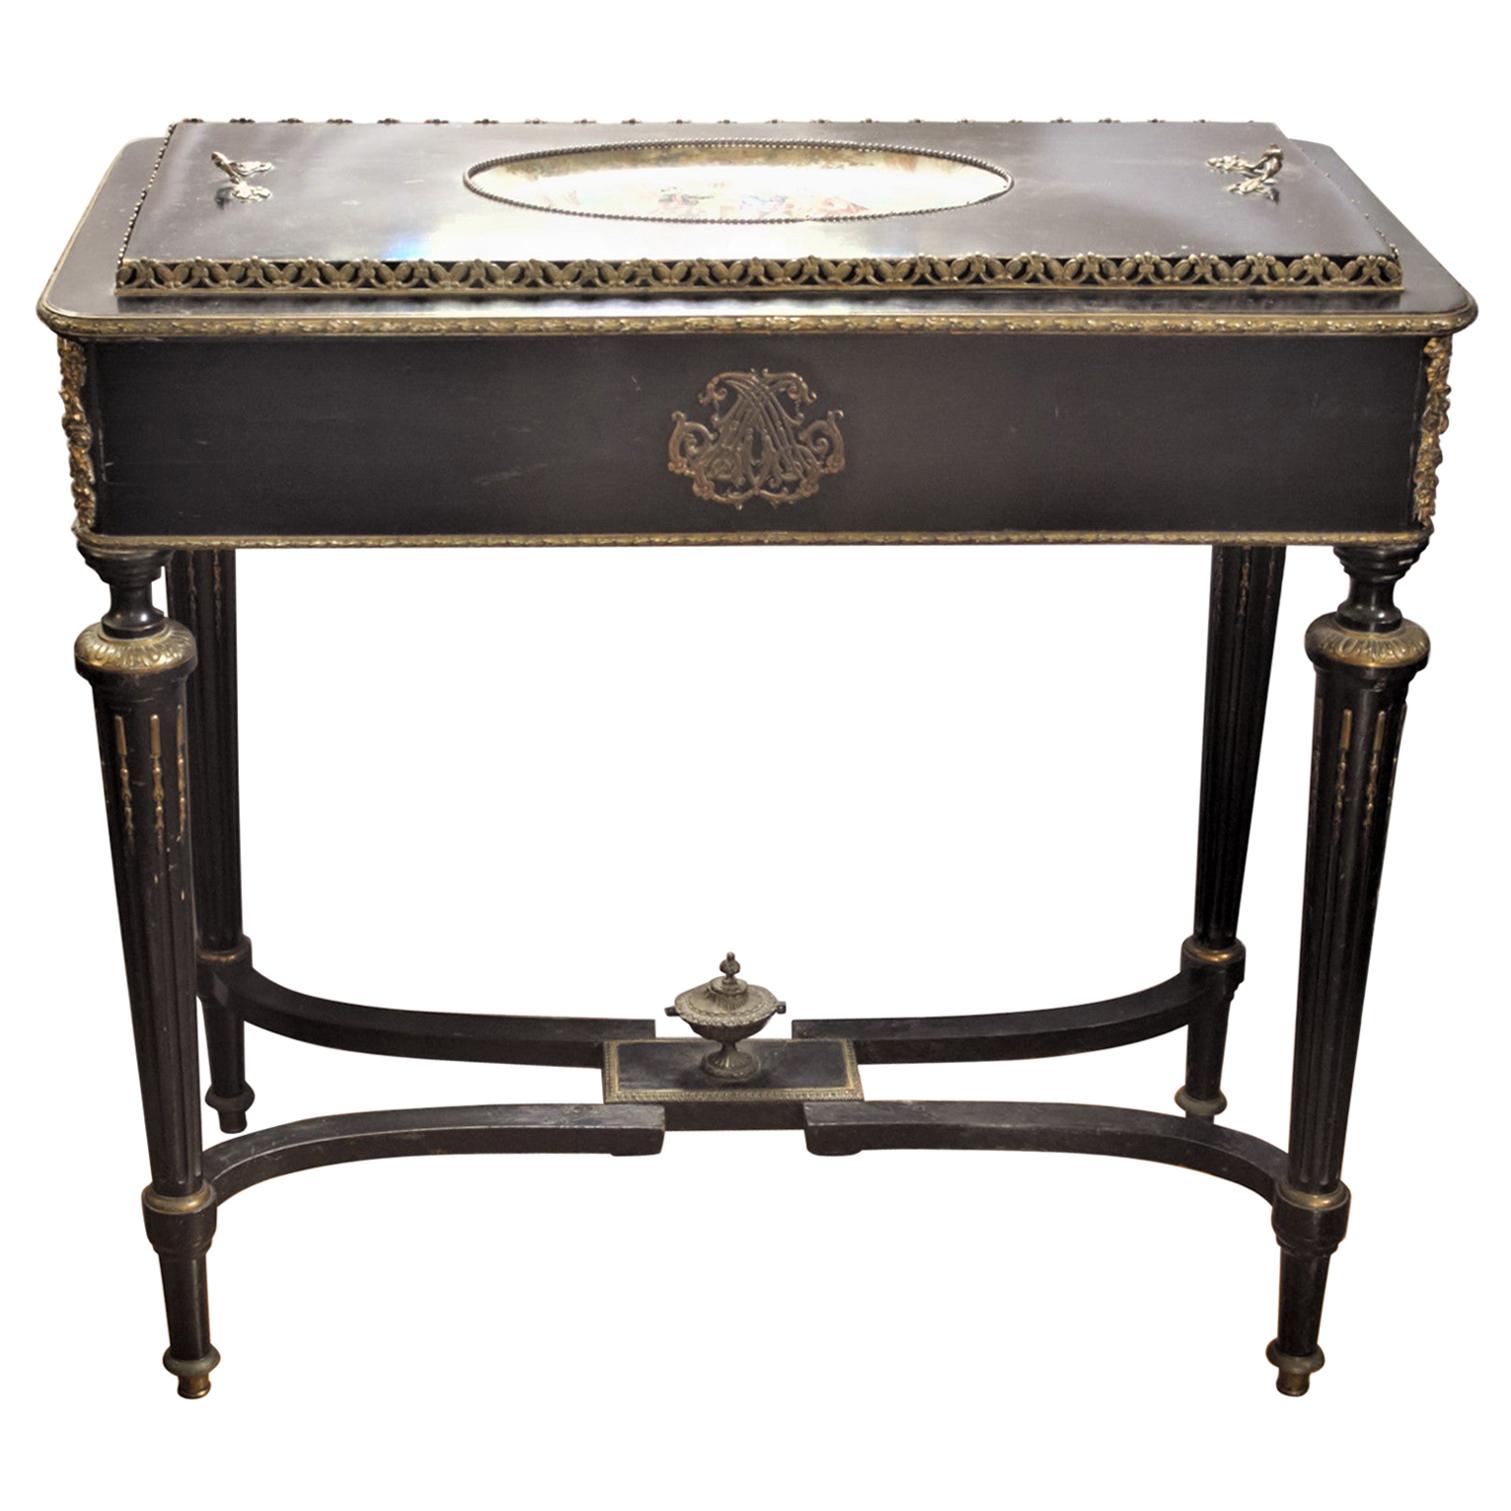 Antique French Louis XVI Styled Ebonized Jardinière Table with Inset Plaque Top For Sale